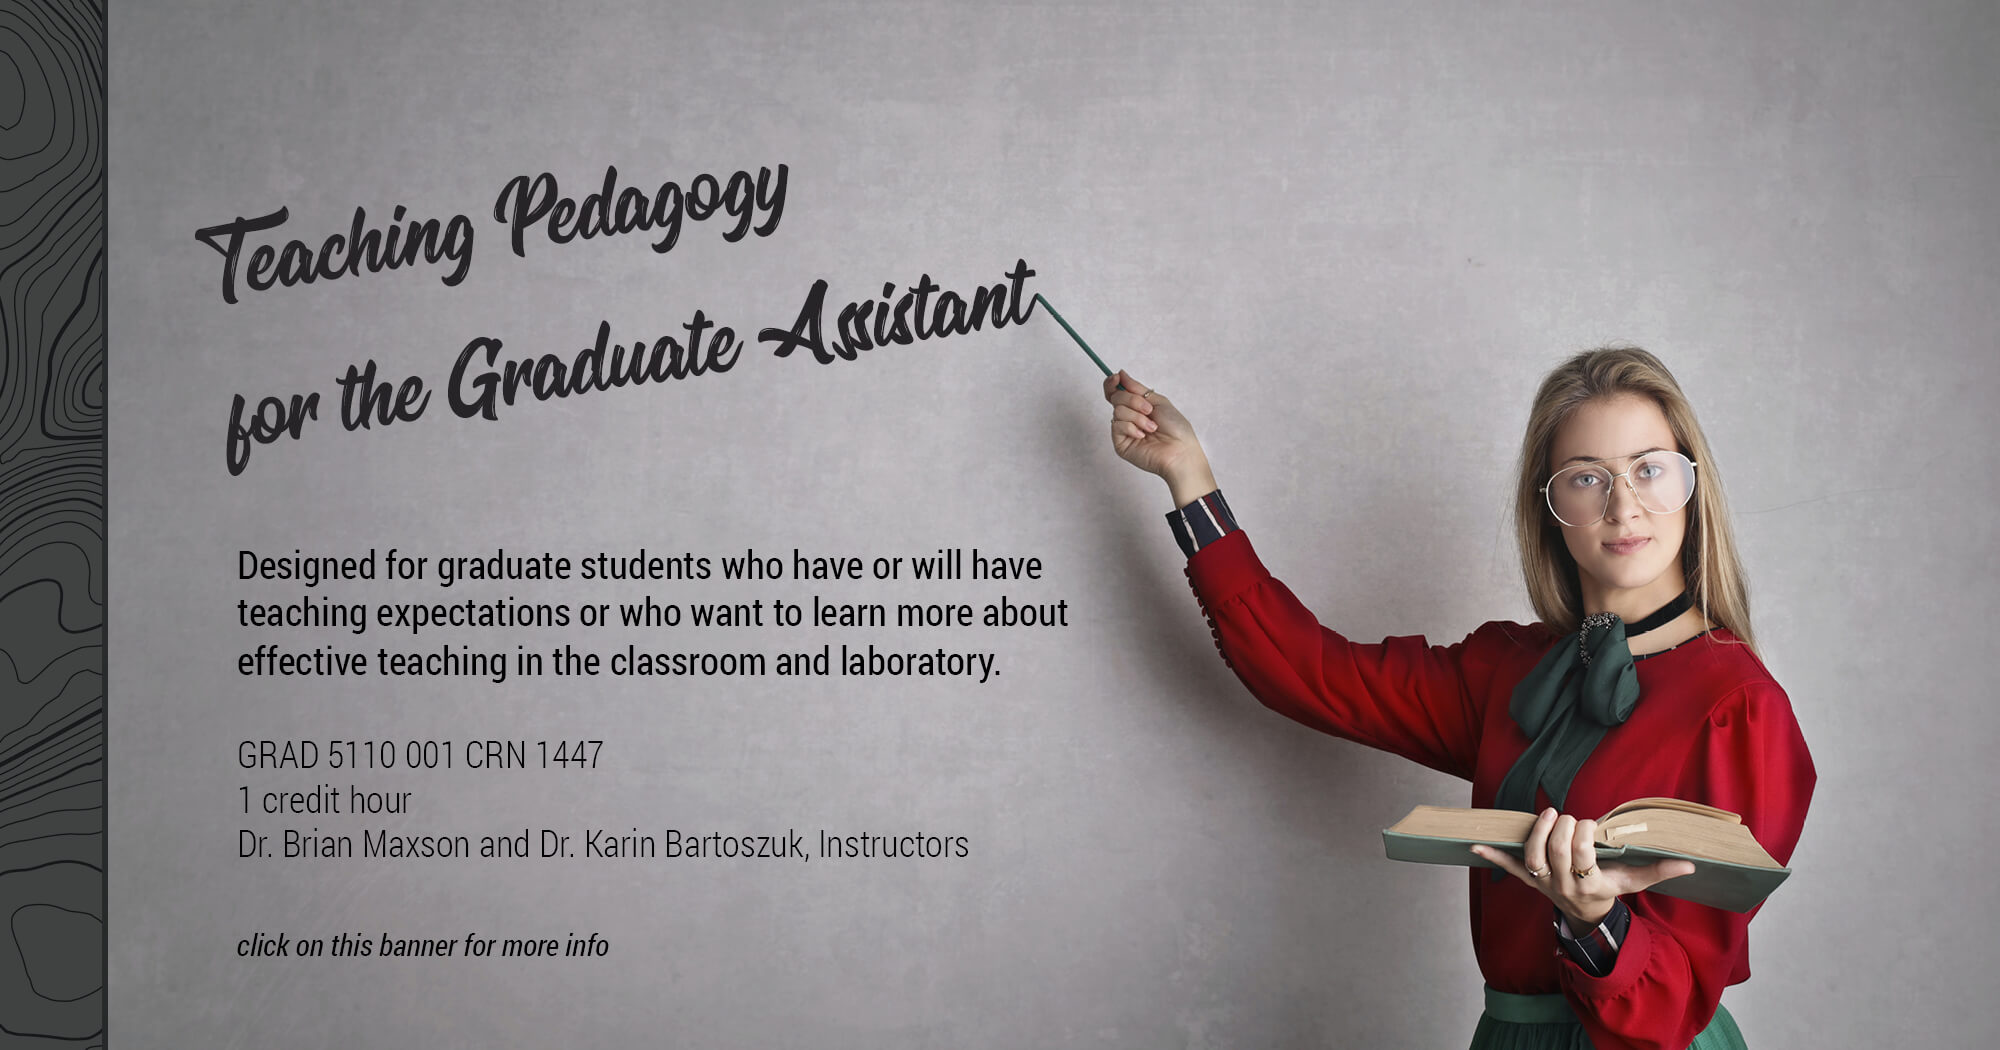 Teaching Pedagogy for the Graduate Assistant